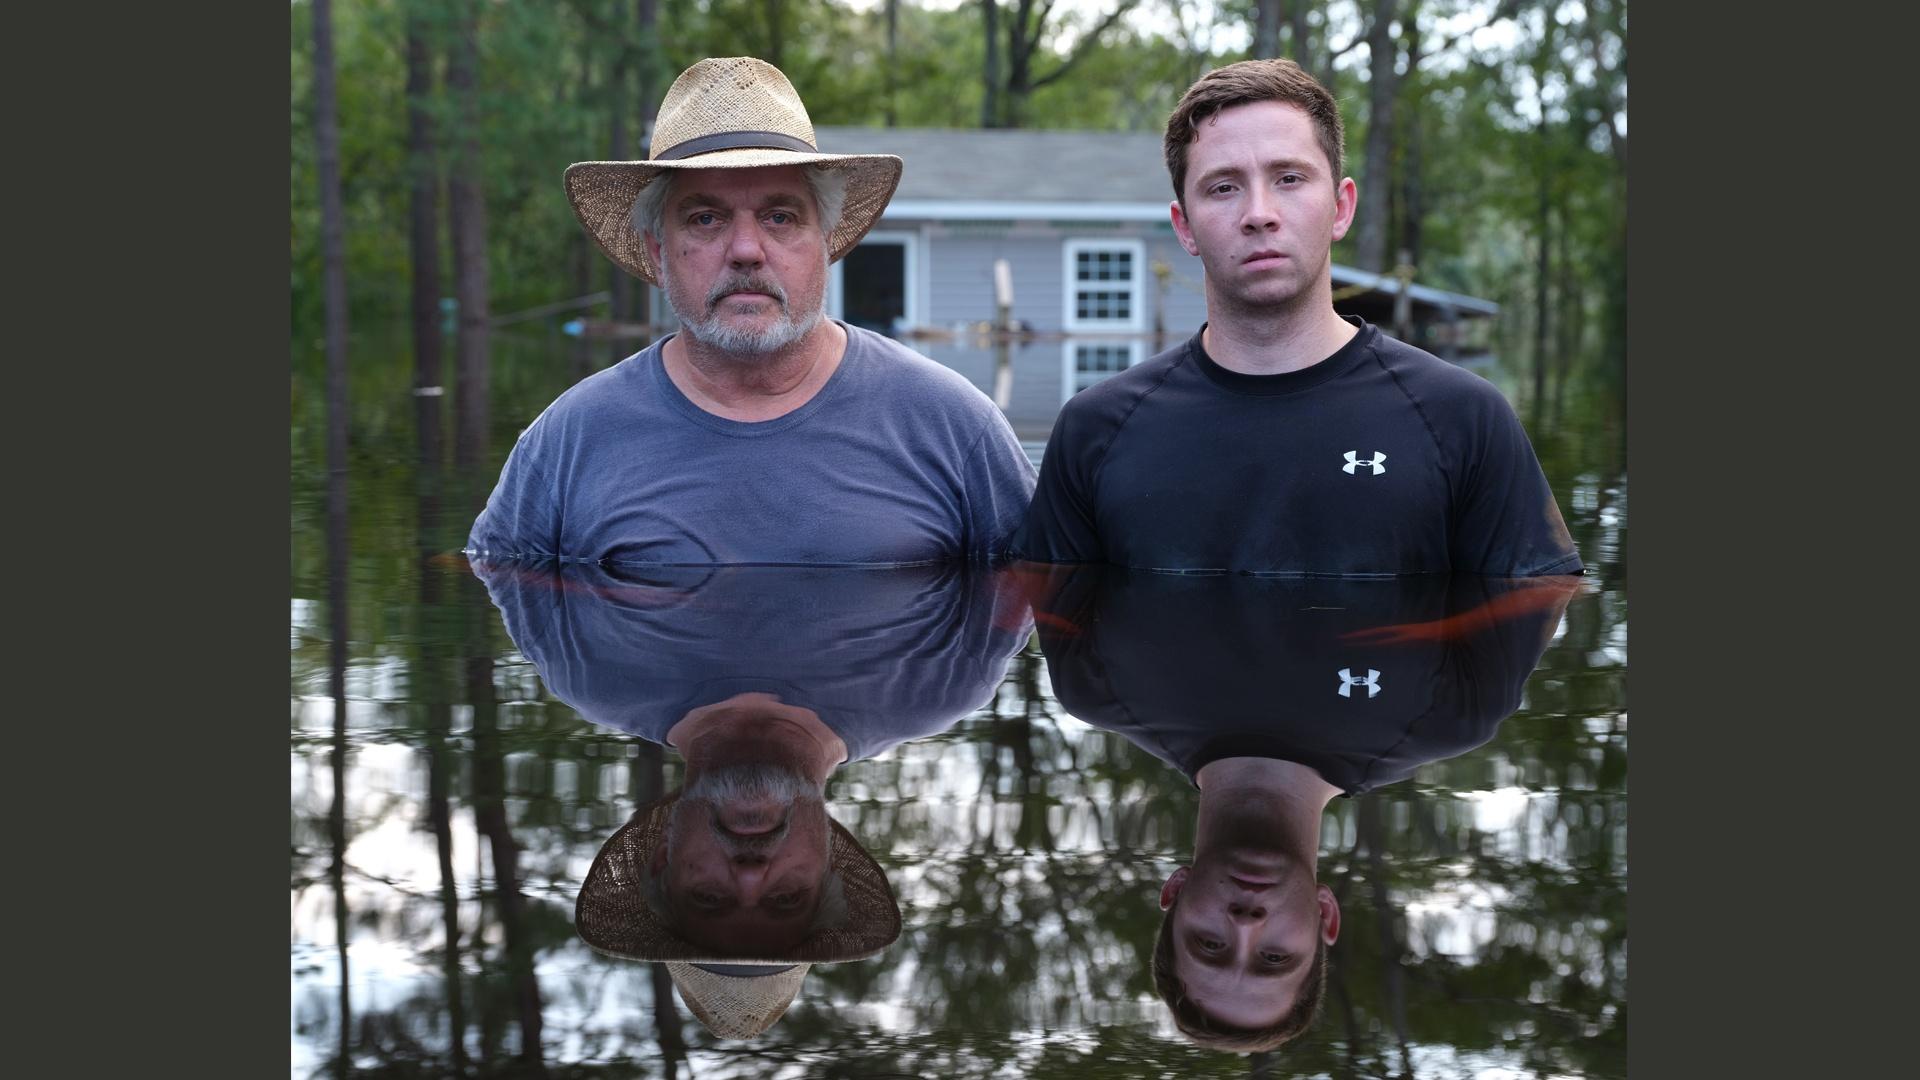 For 12 years, photographer Gideon Mendel has documented floods around the world. This photo shows the plight of residents in the aftermath of Hurricane Florence, in the Carolinas.